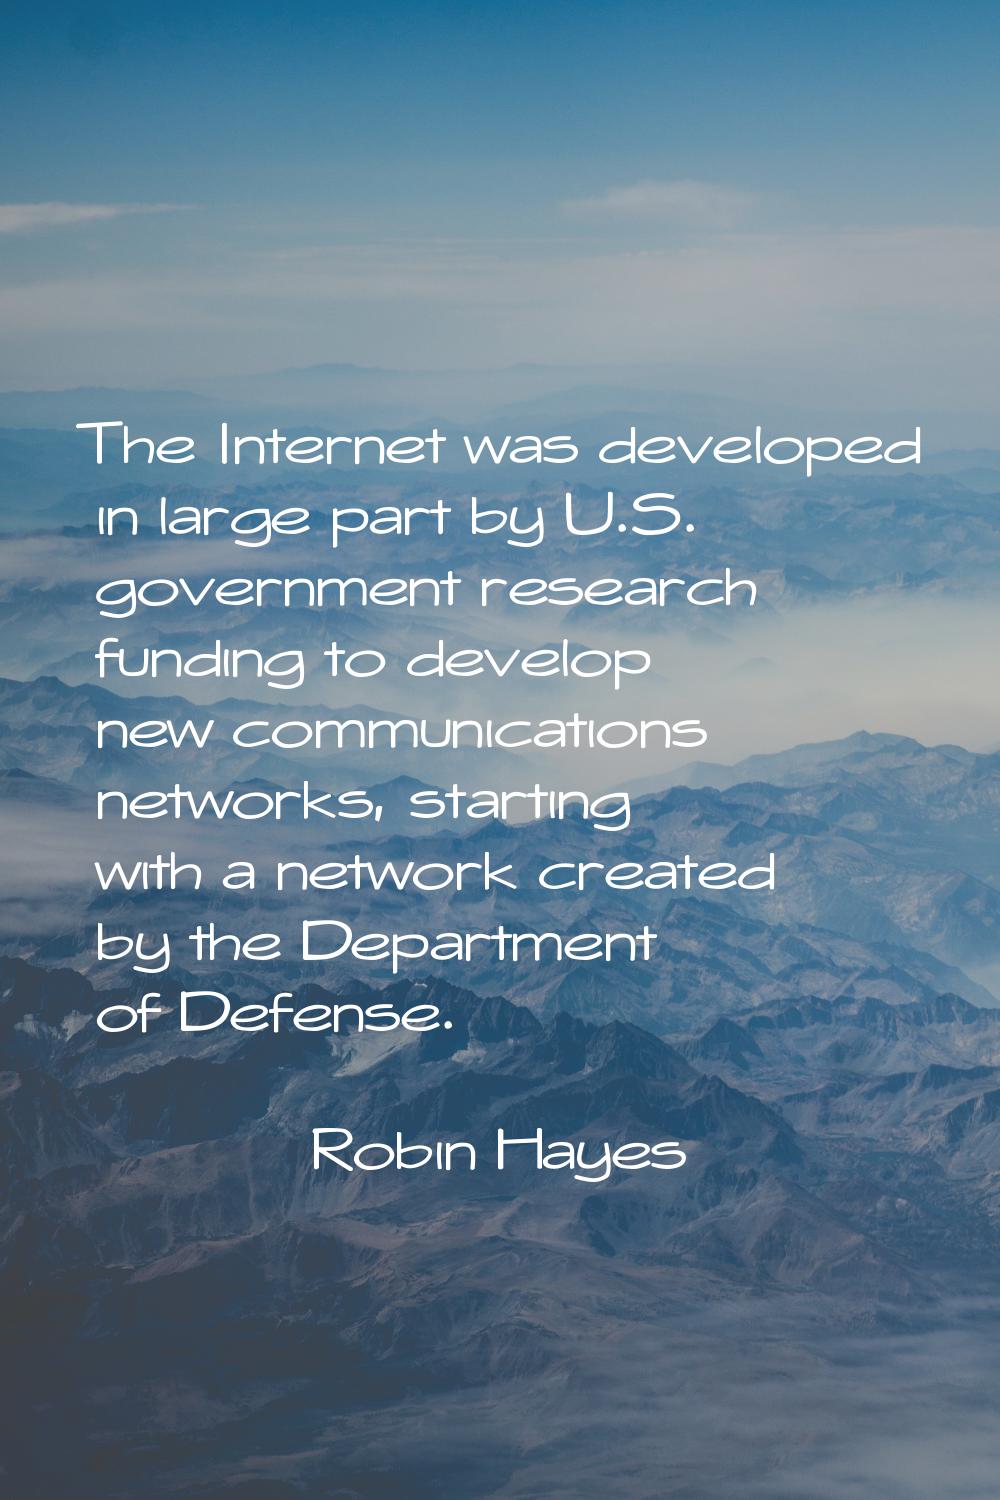 The Internet was developed in large part by U.S. government research funding to develop new communi